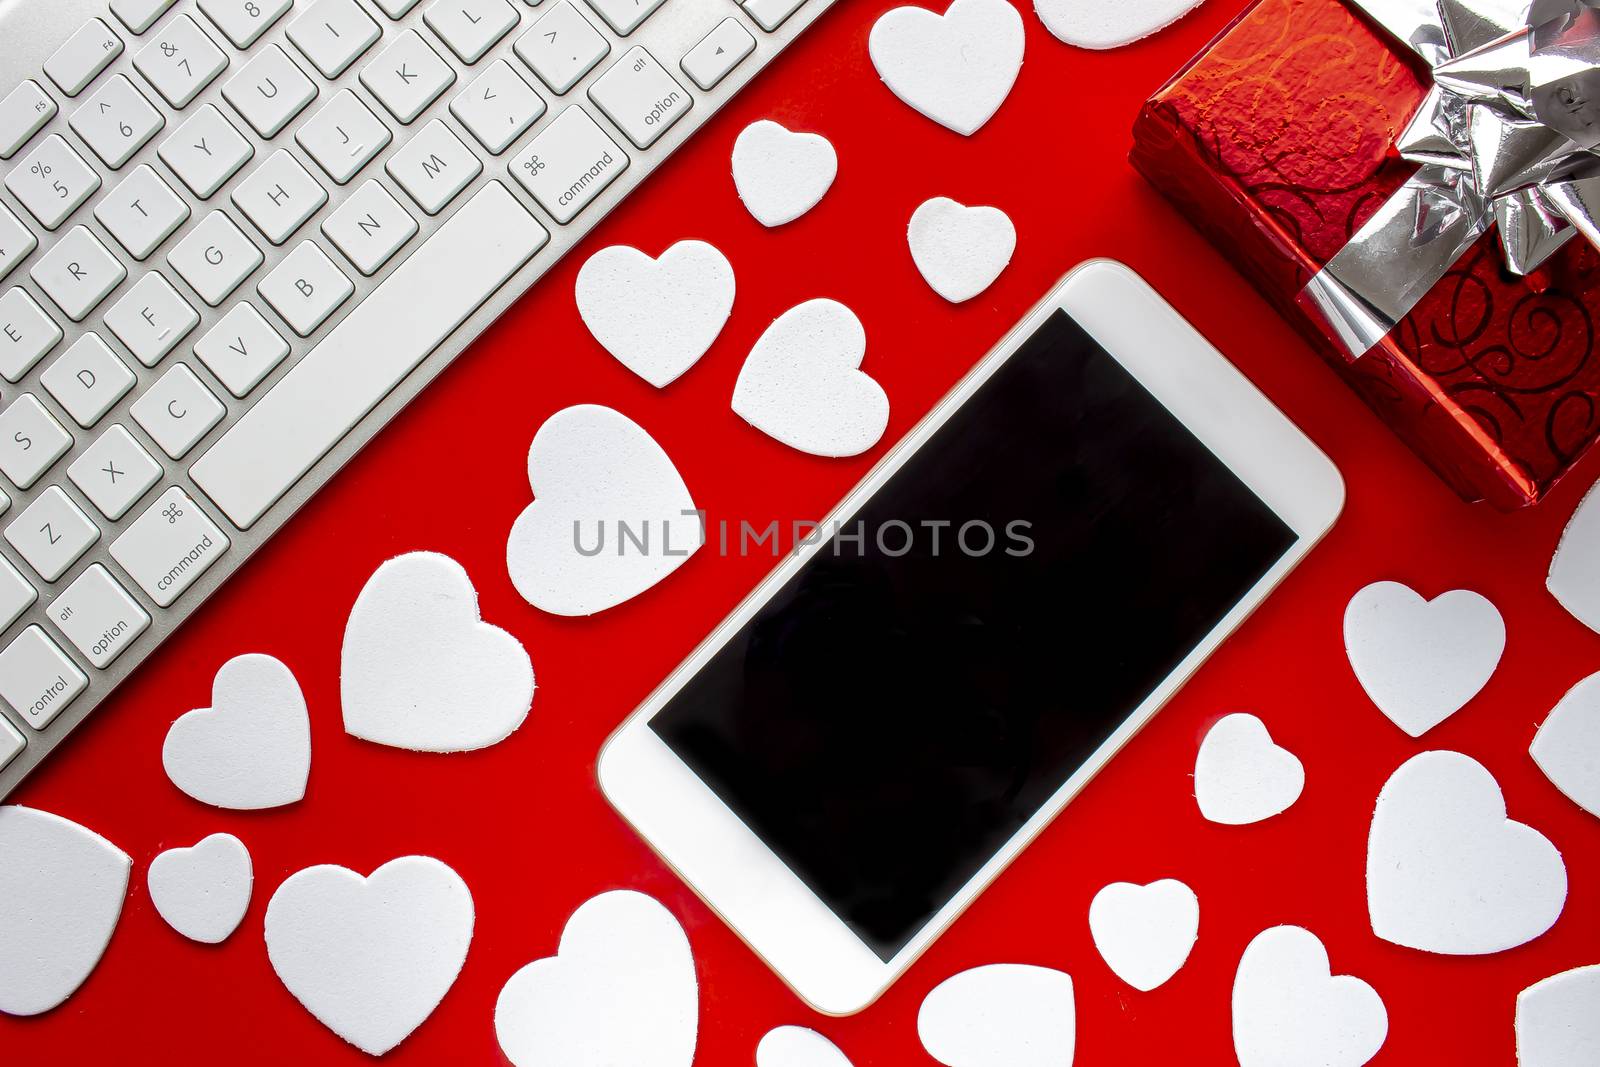 A smart phone with a keyboard a present and hearts on a red background with hearts by oasisamuel